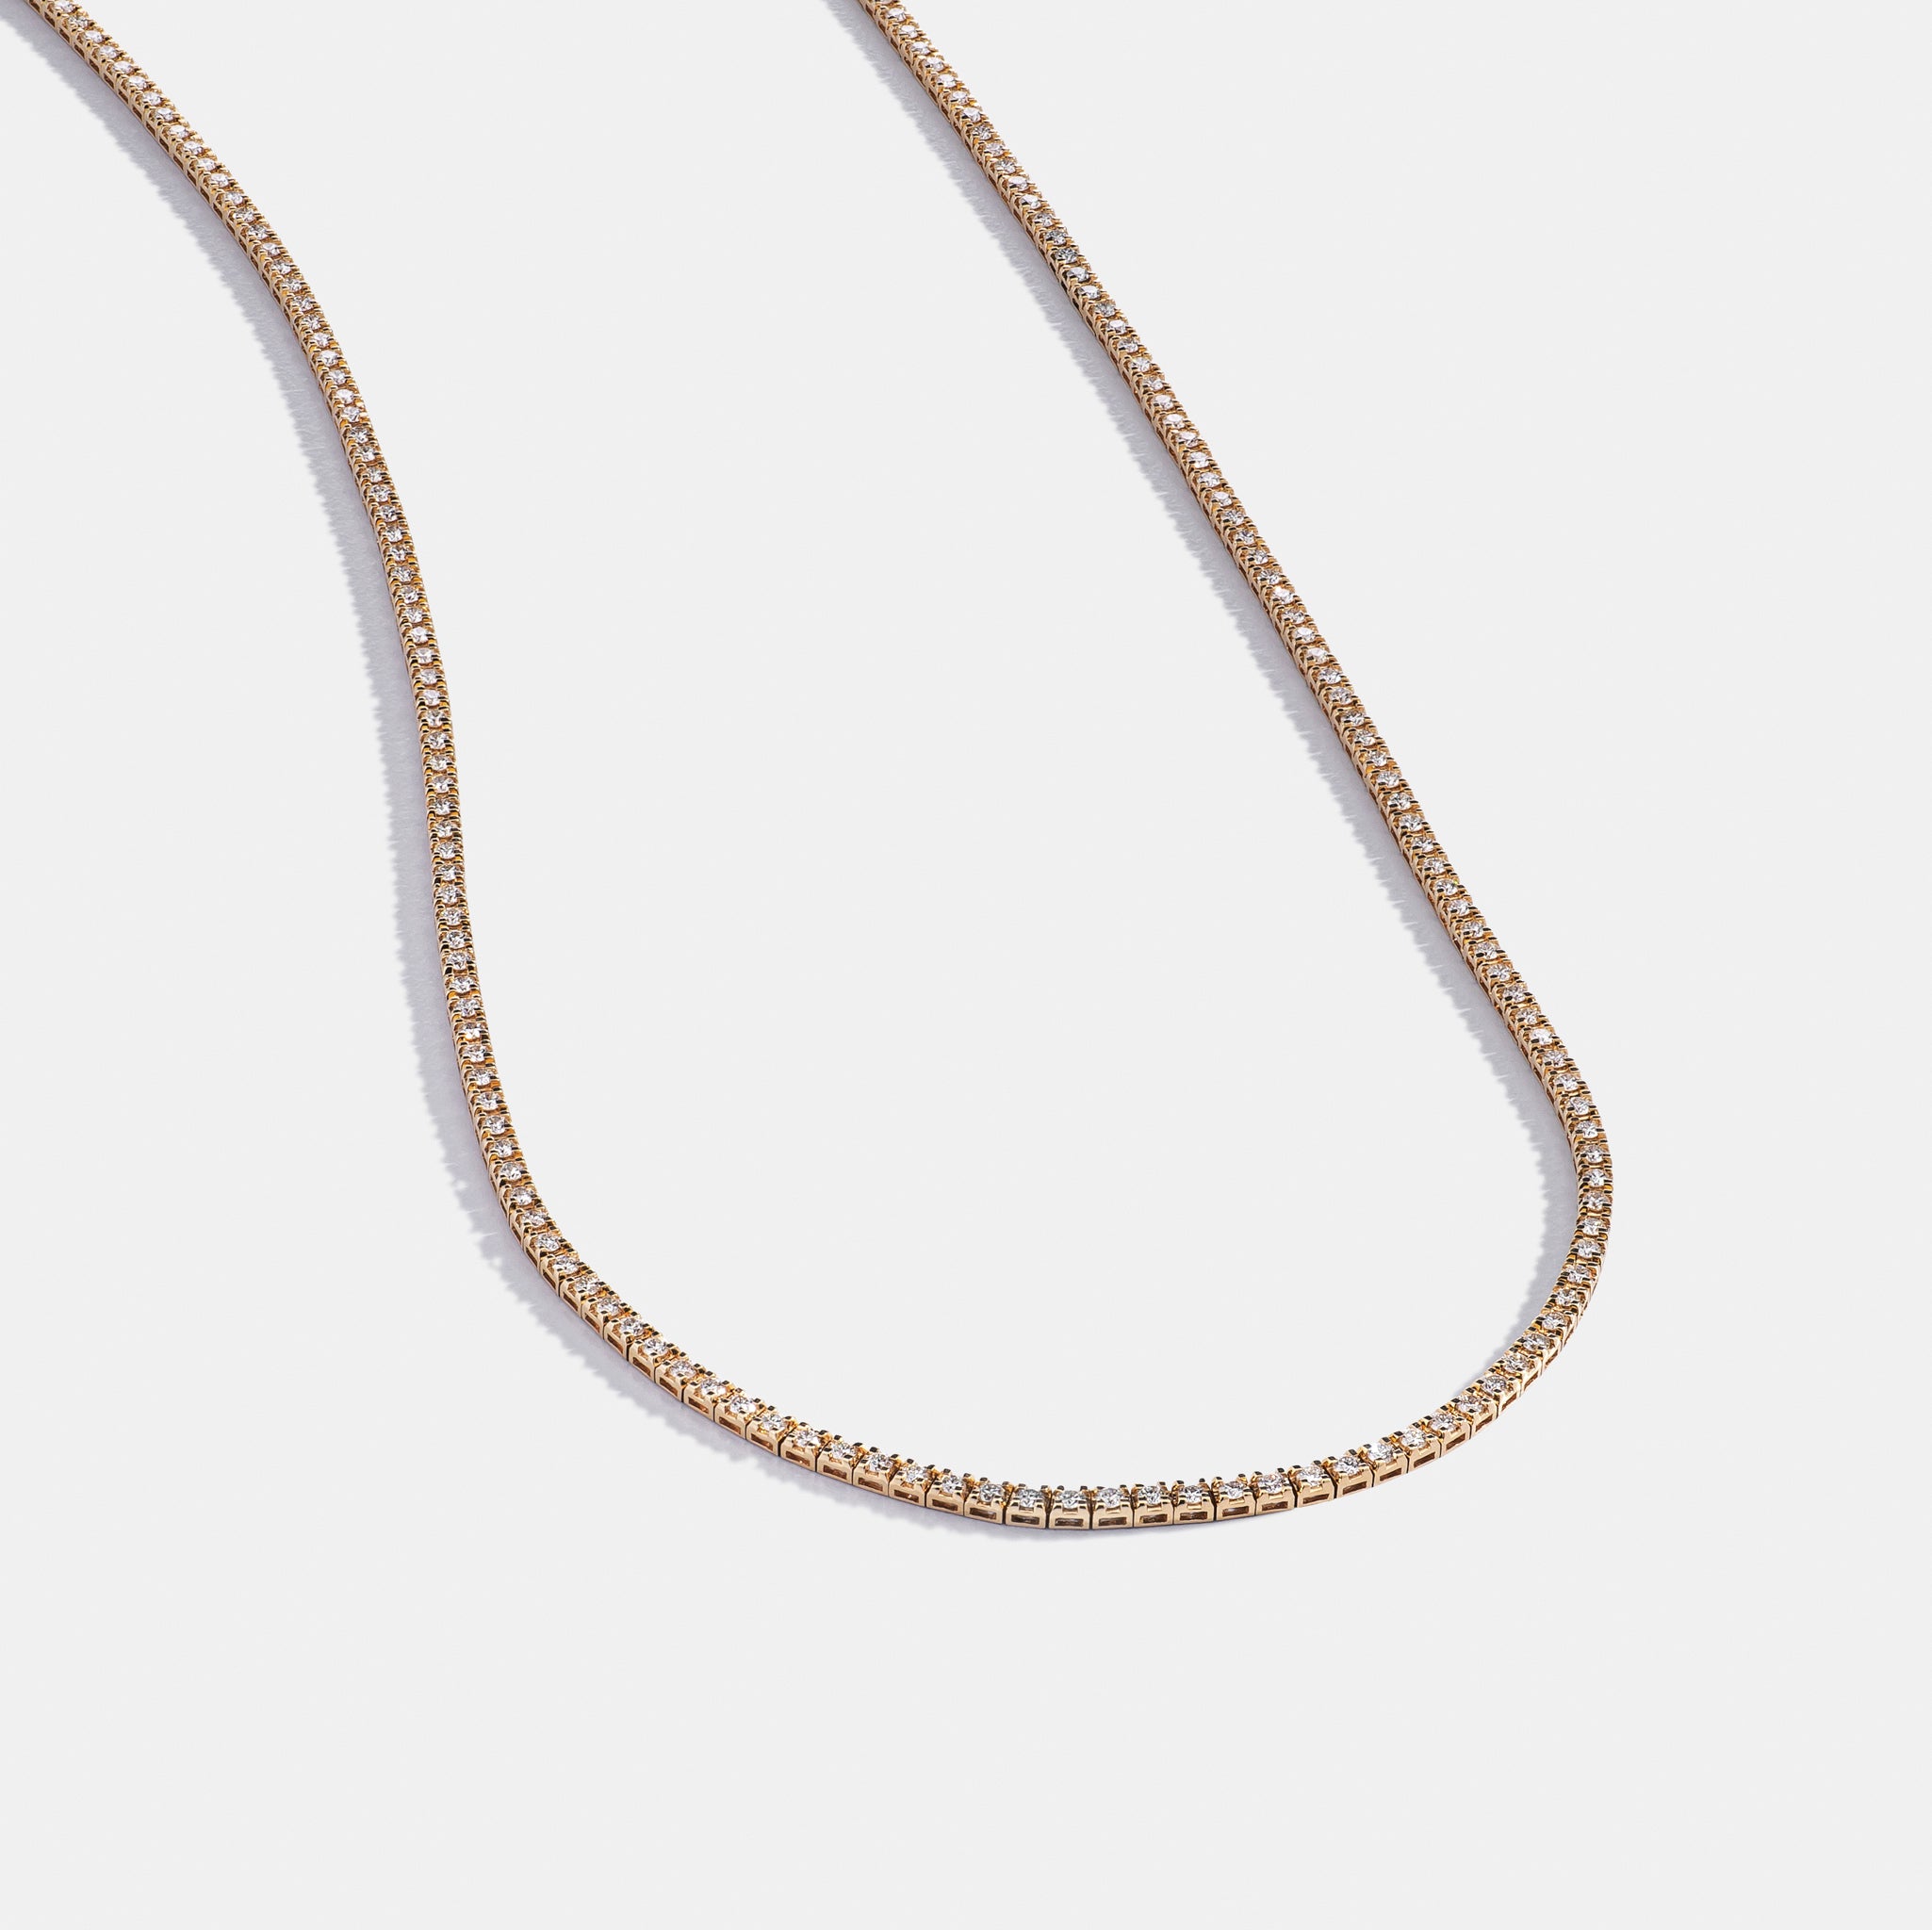 All The Way Diamond Yellow Gold 7.50cts Long 36" Tennis Necklace